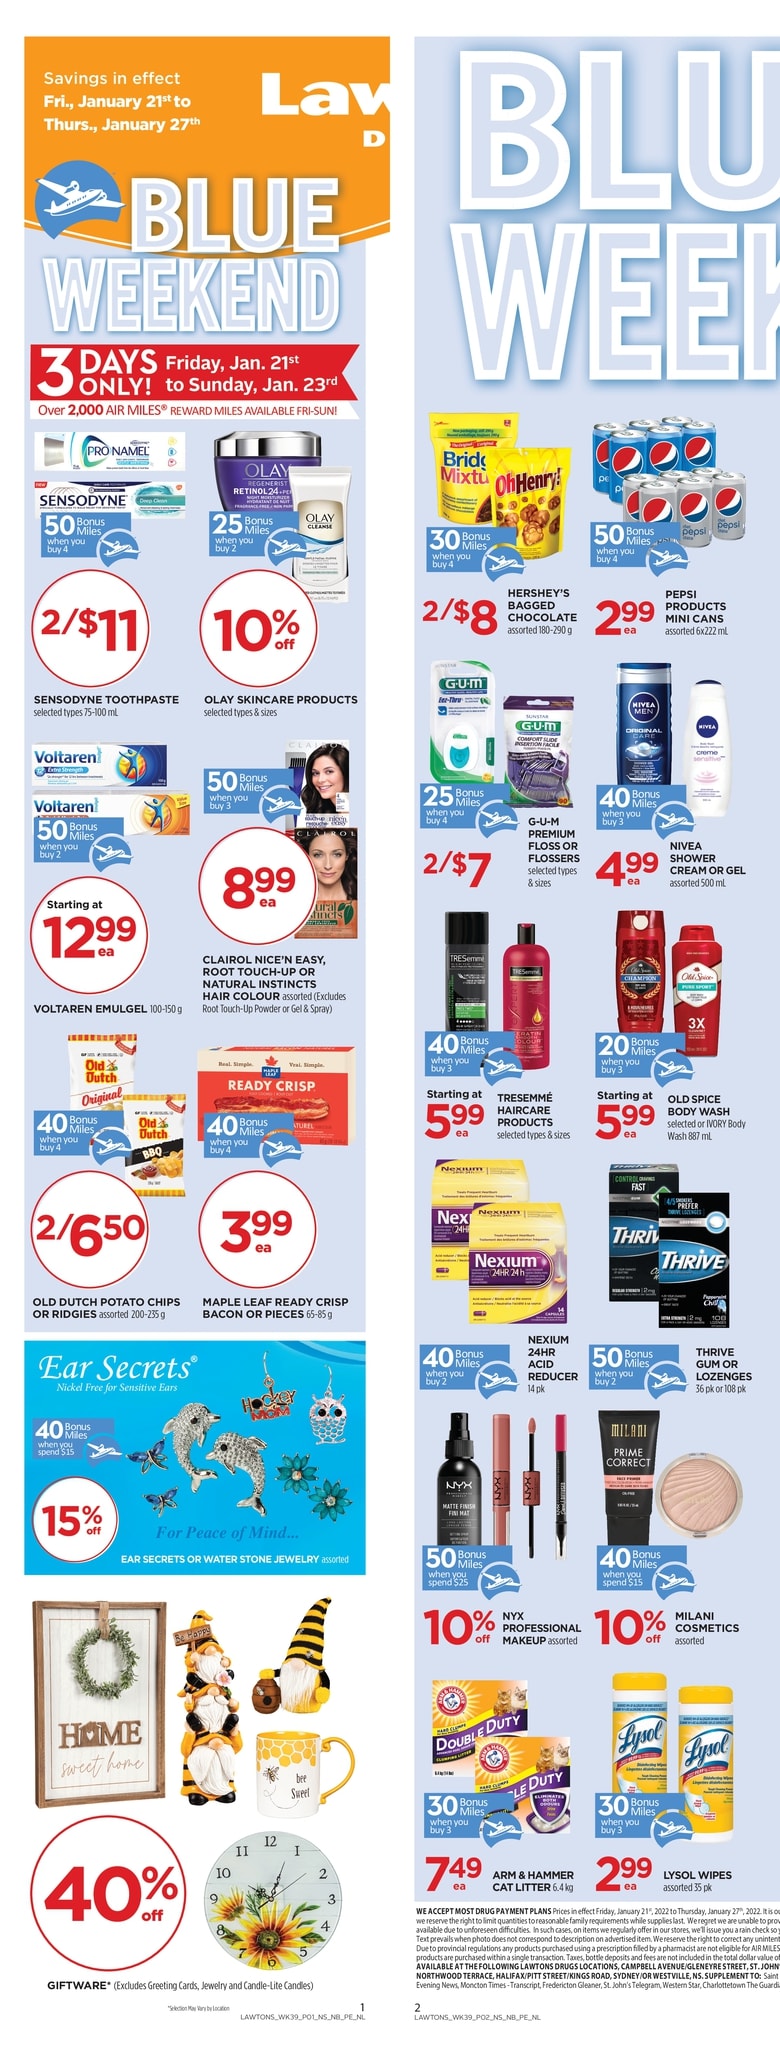 Lawtons Drugs - Weekly Flyer Specials - Page 1